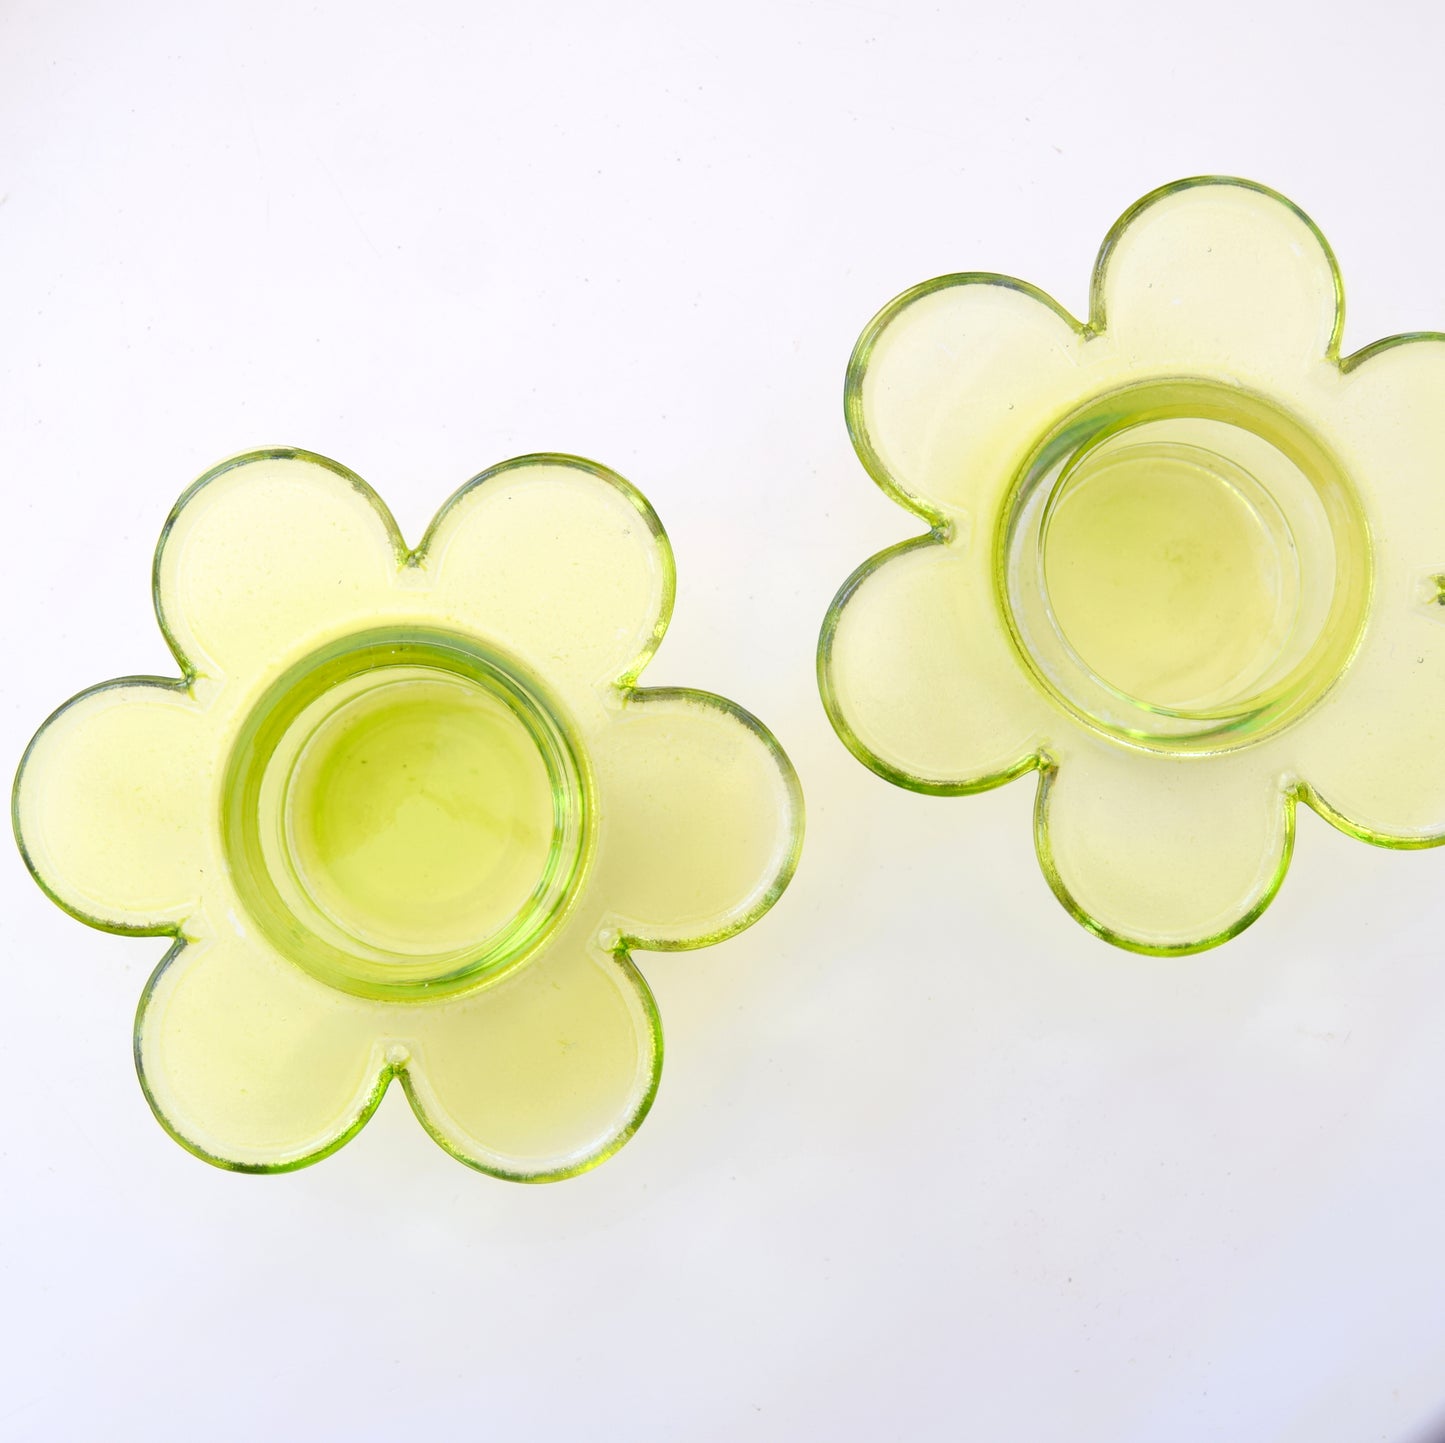 Vintage 1990s Glass Flower Candle Holders x2 - Lime Green